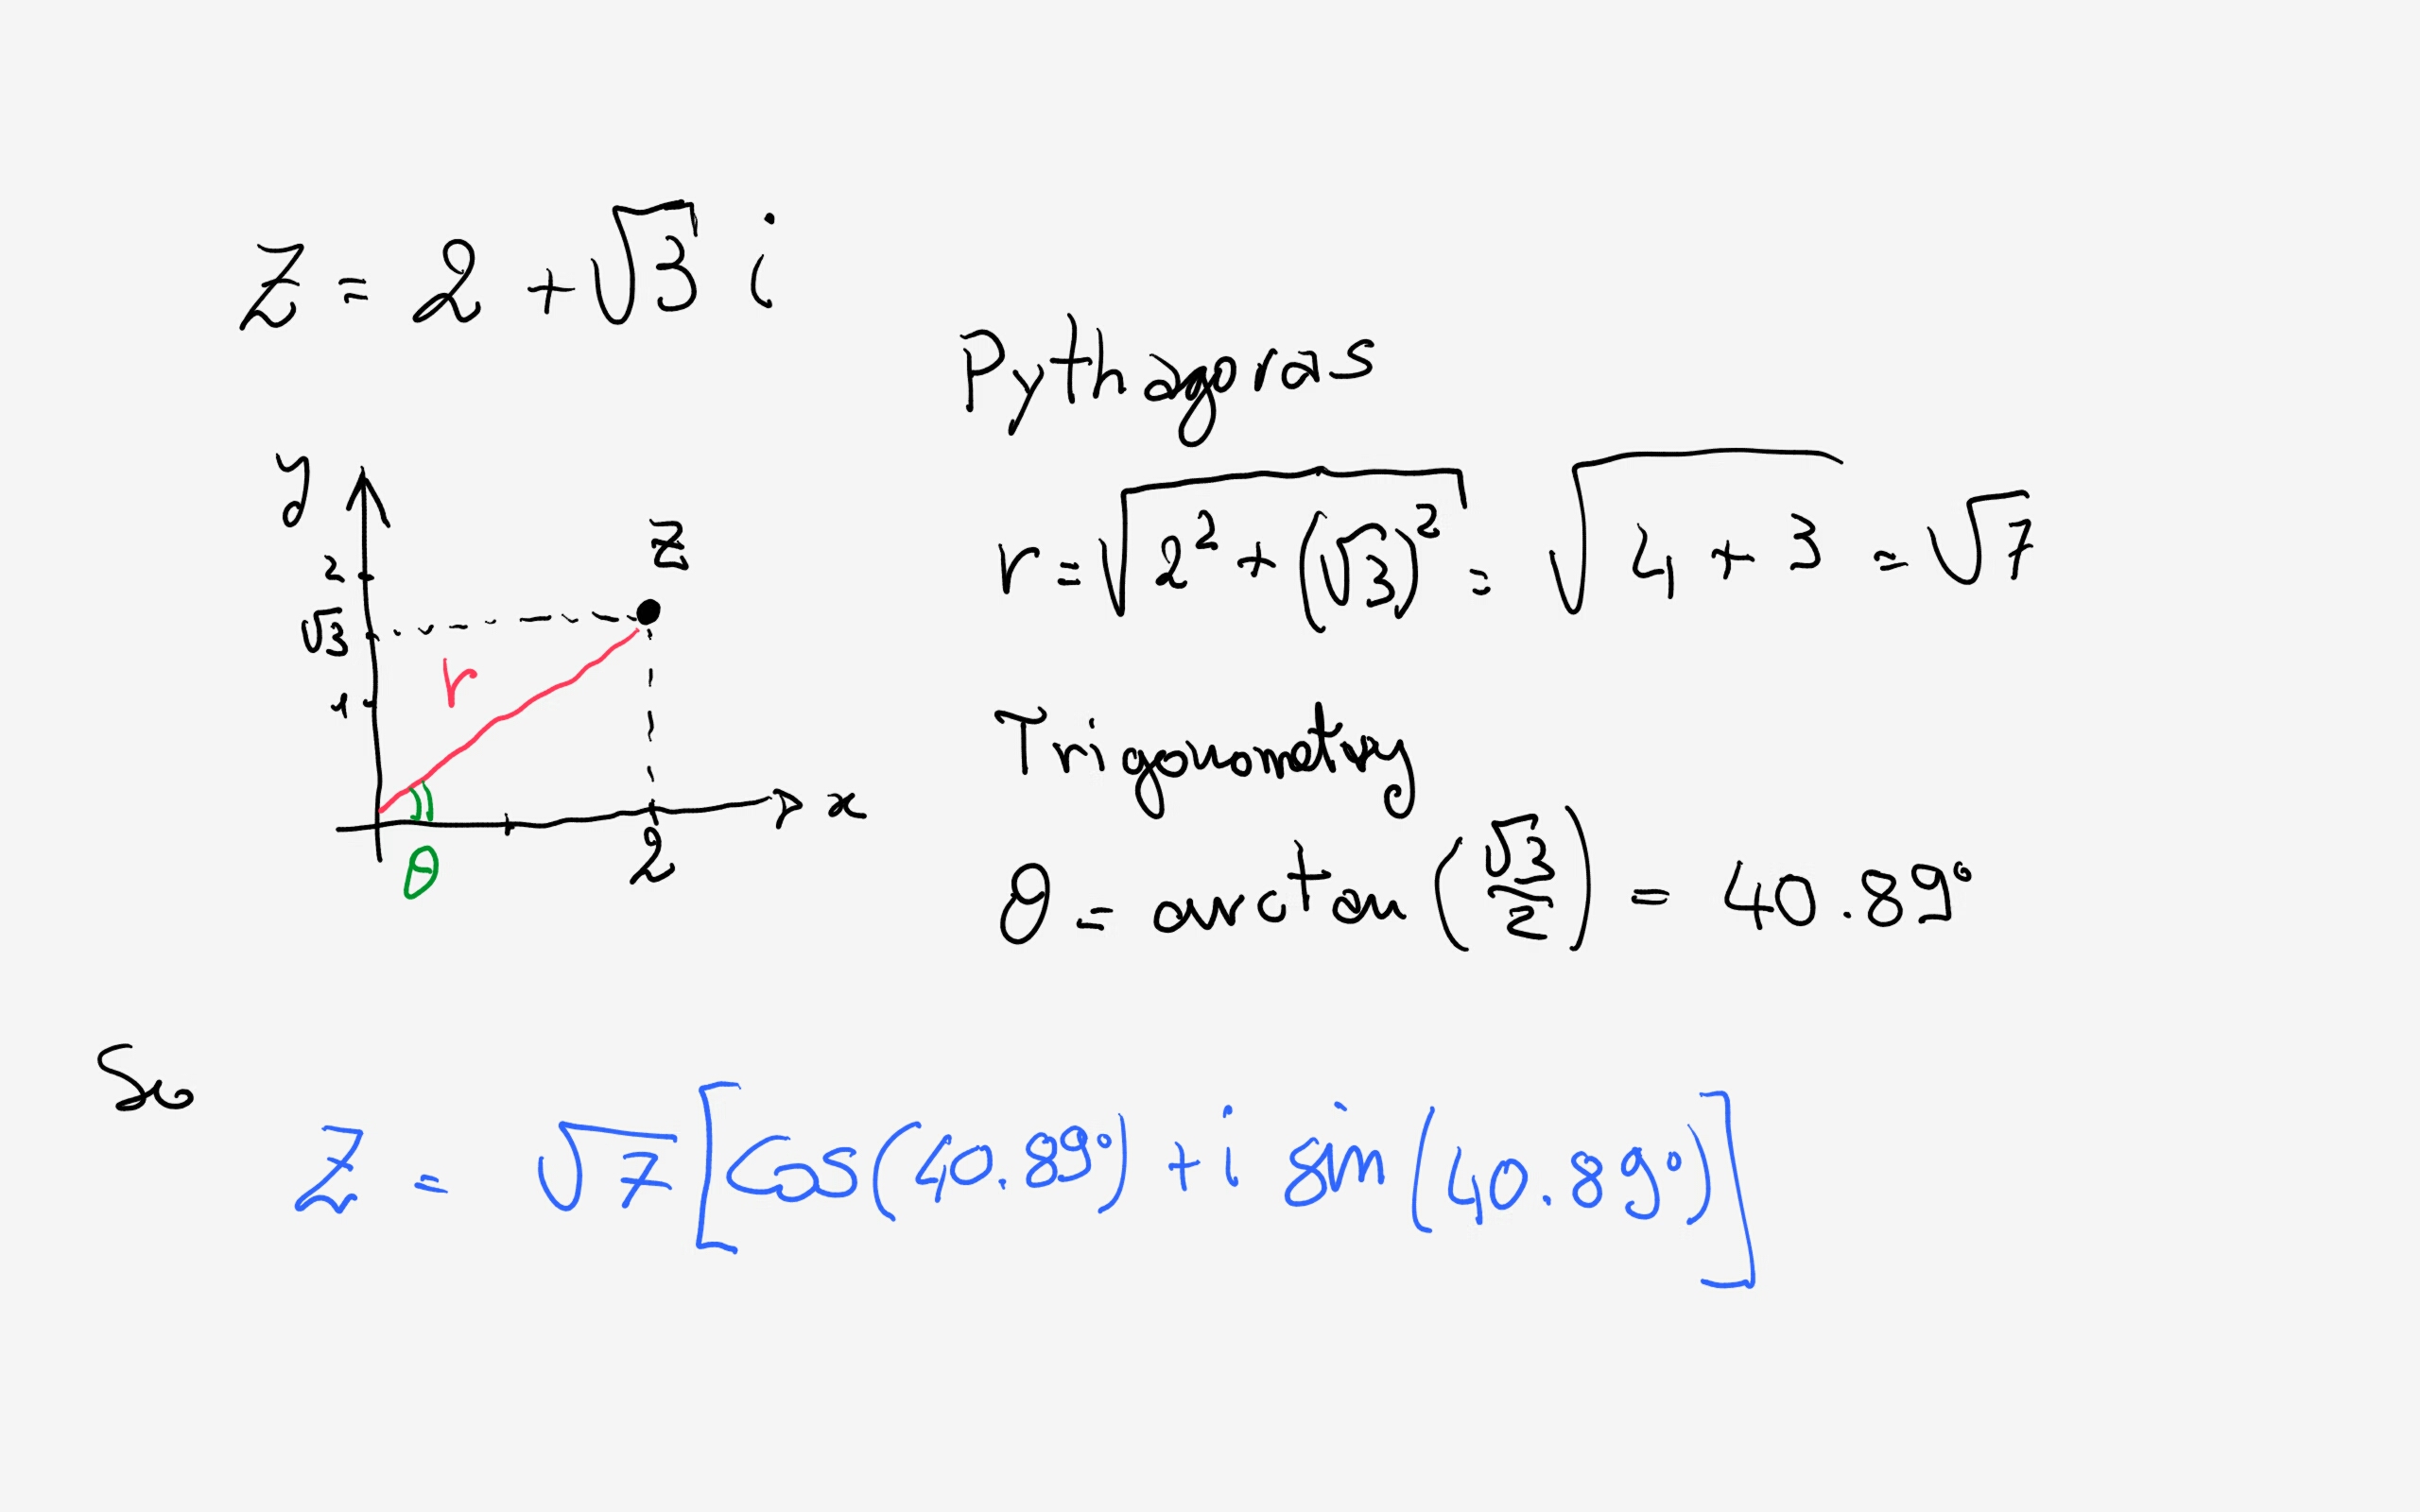 How Do You Express The Complex Number In Trigonometric Form 2 sqrt 3 